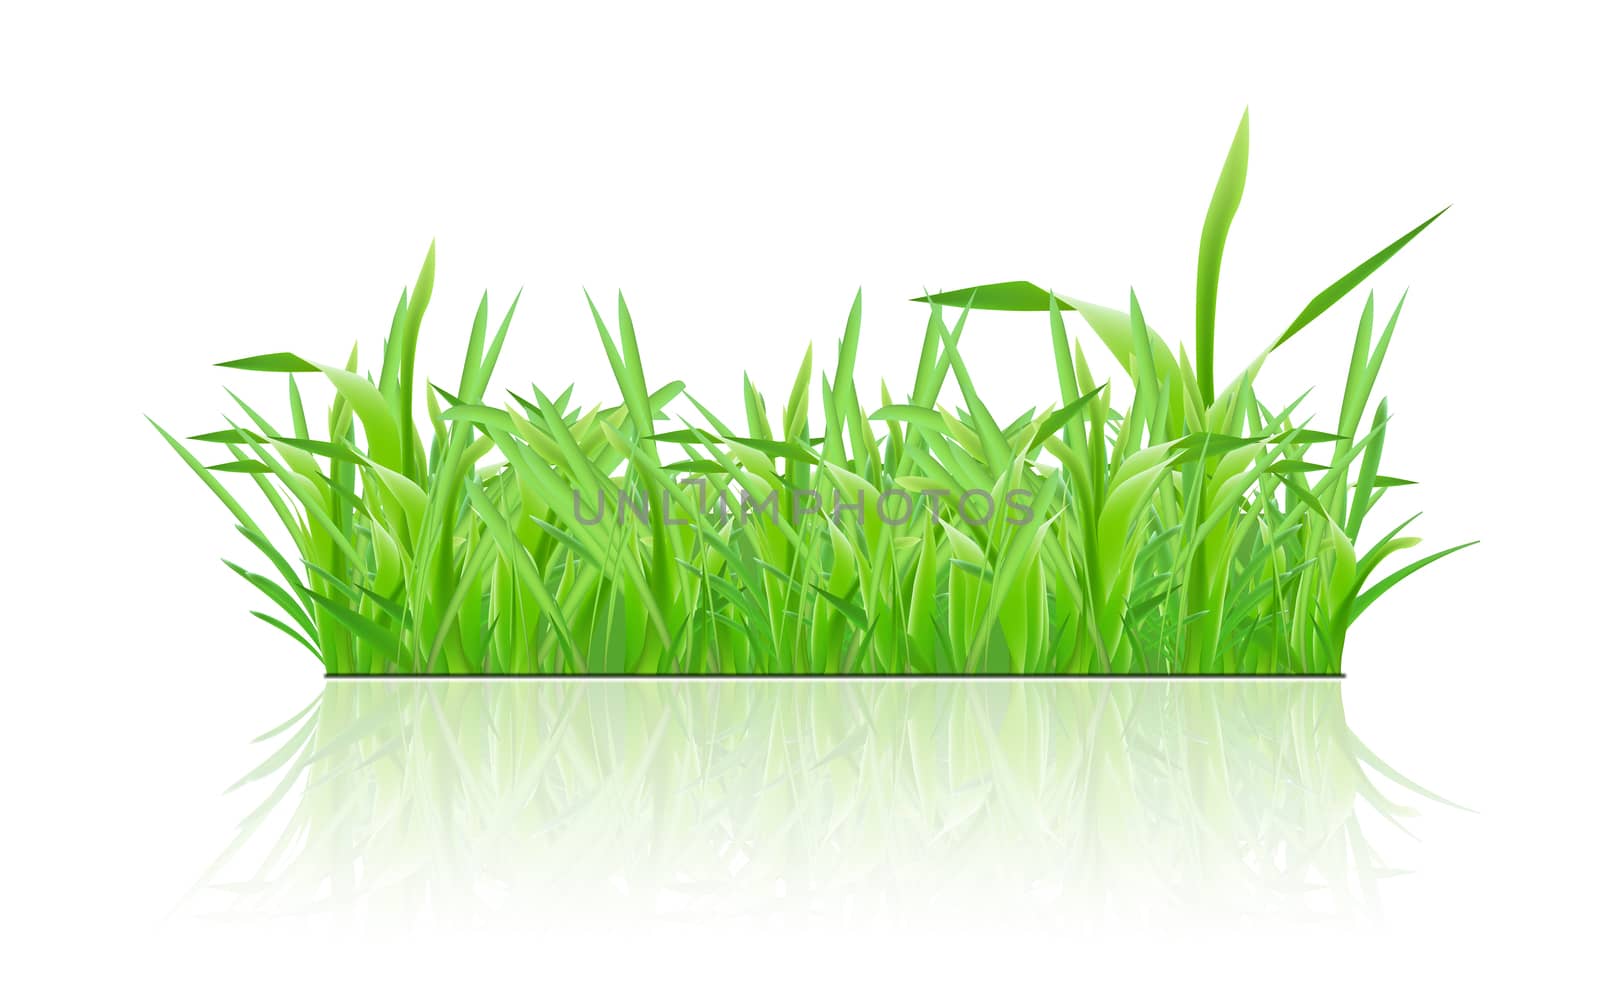 Green grass with shadow on white background